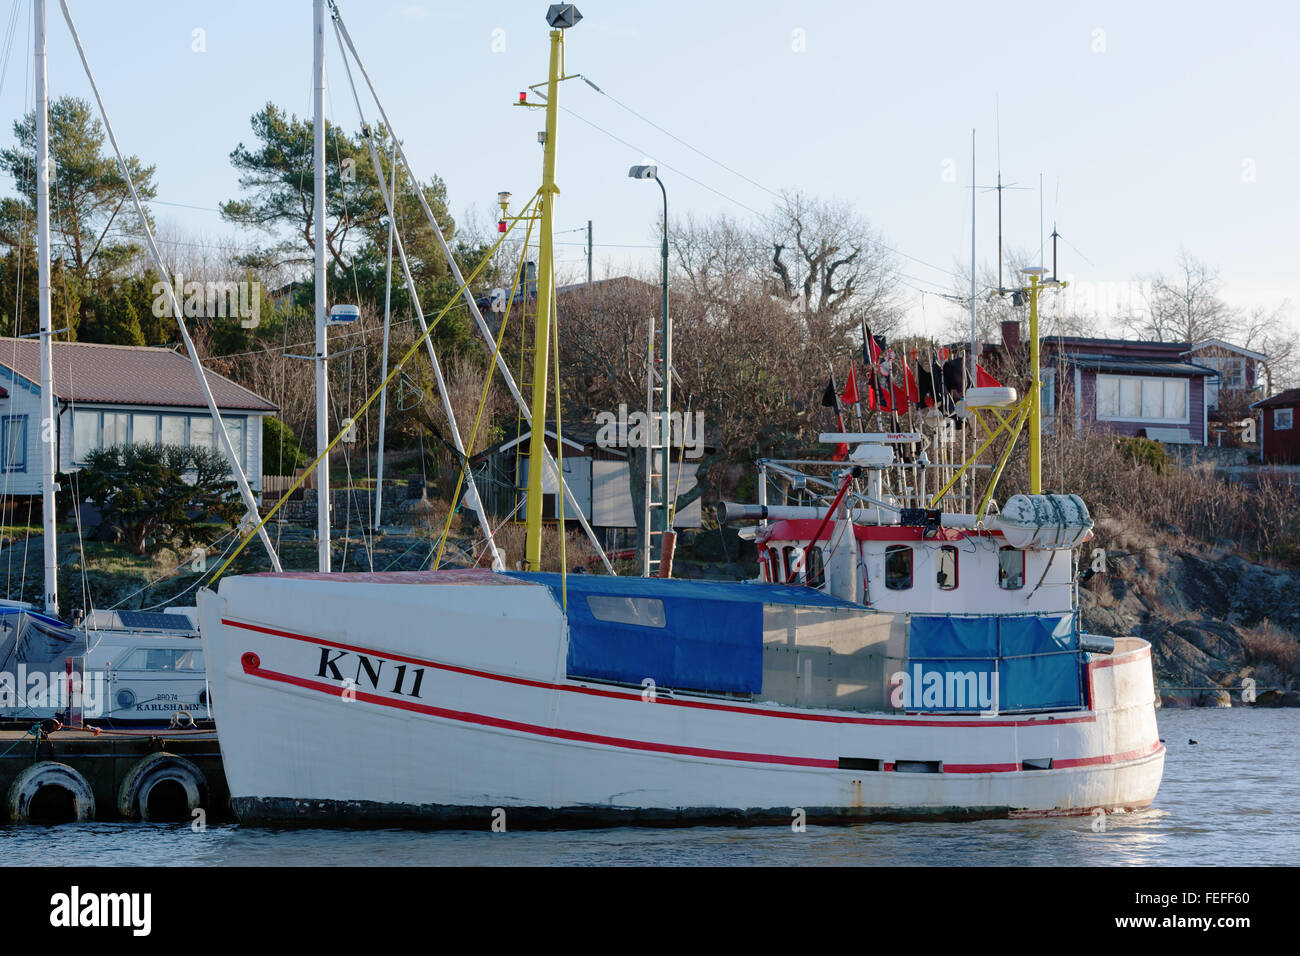 Karlshamn, Sweden - February 04, 2016: A small fishing boat is moored at the docks of a fishing harbor. Fishing regulations make Stock Photo